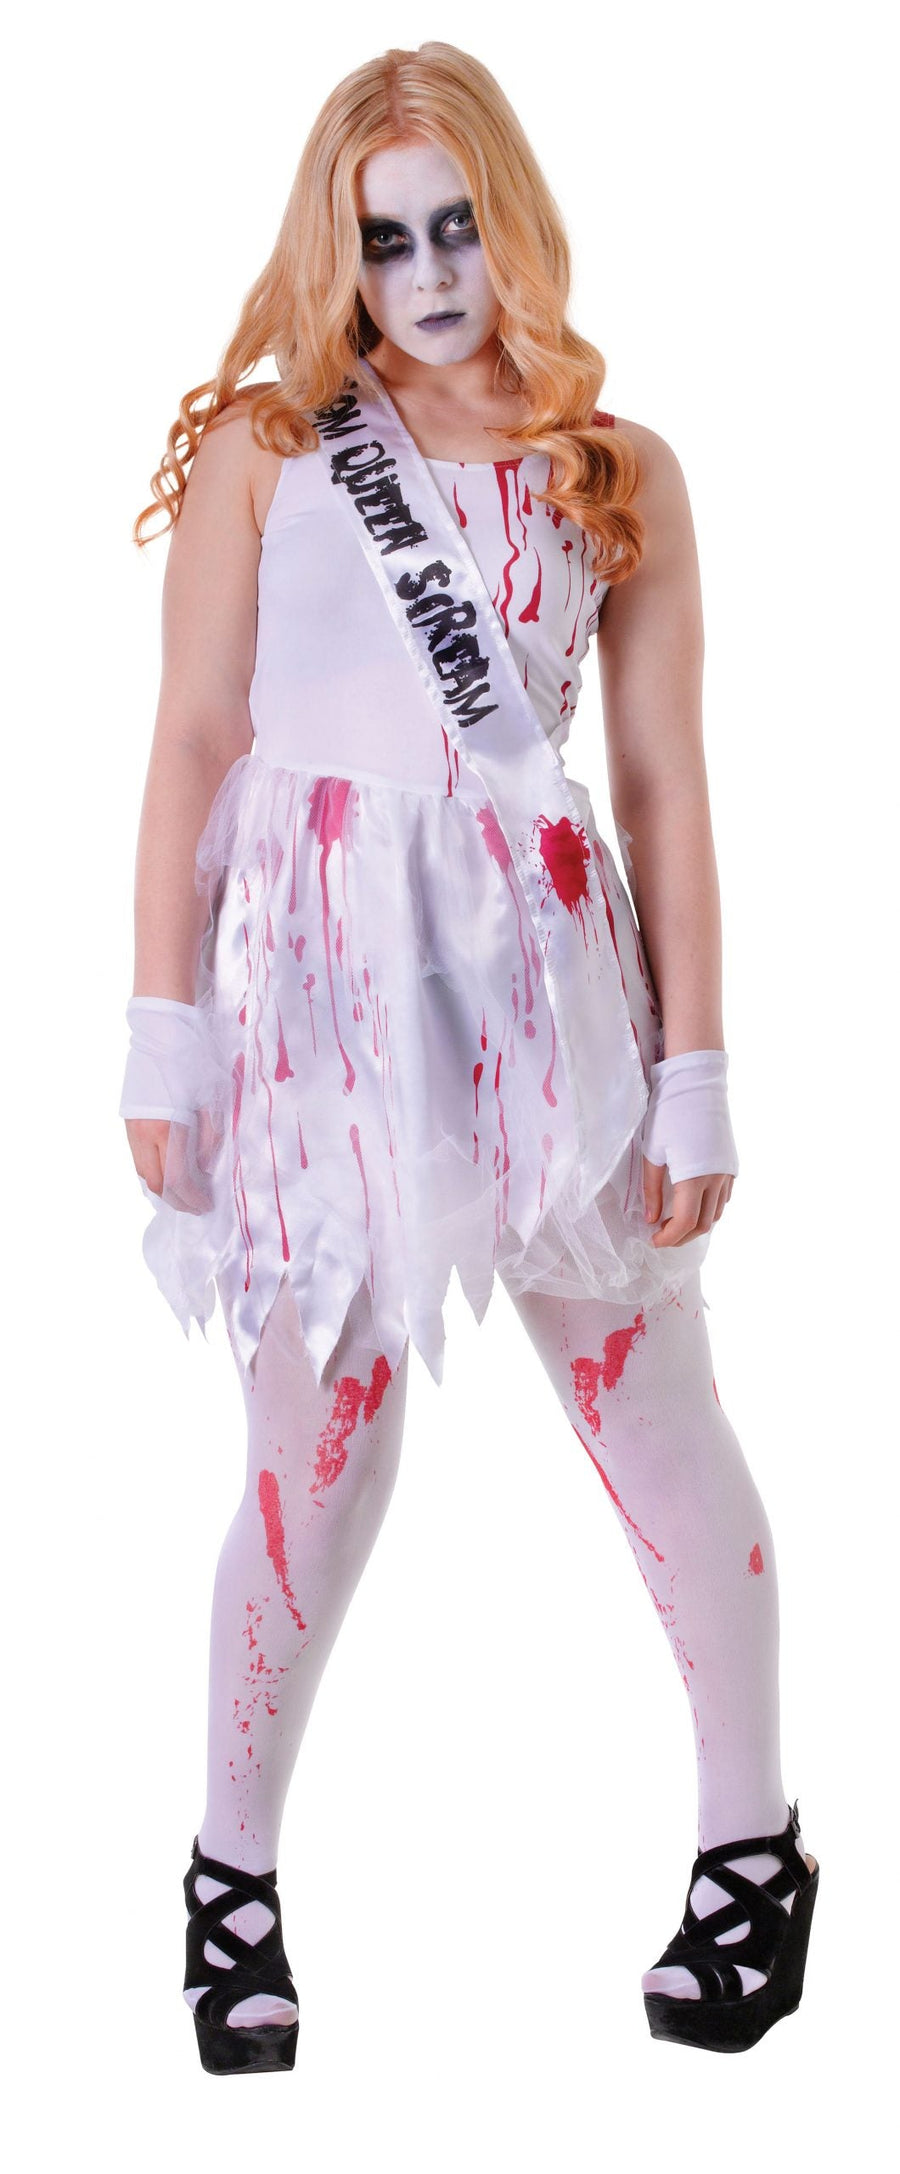 Bloody Prom Queen Teen Costume Female Uk Size 6 10 28" 30" Chest_1